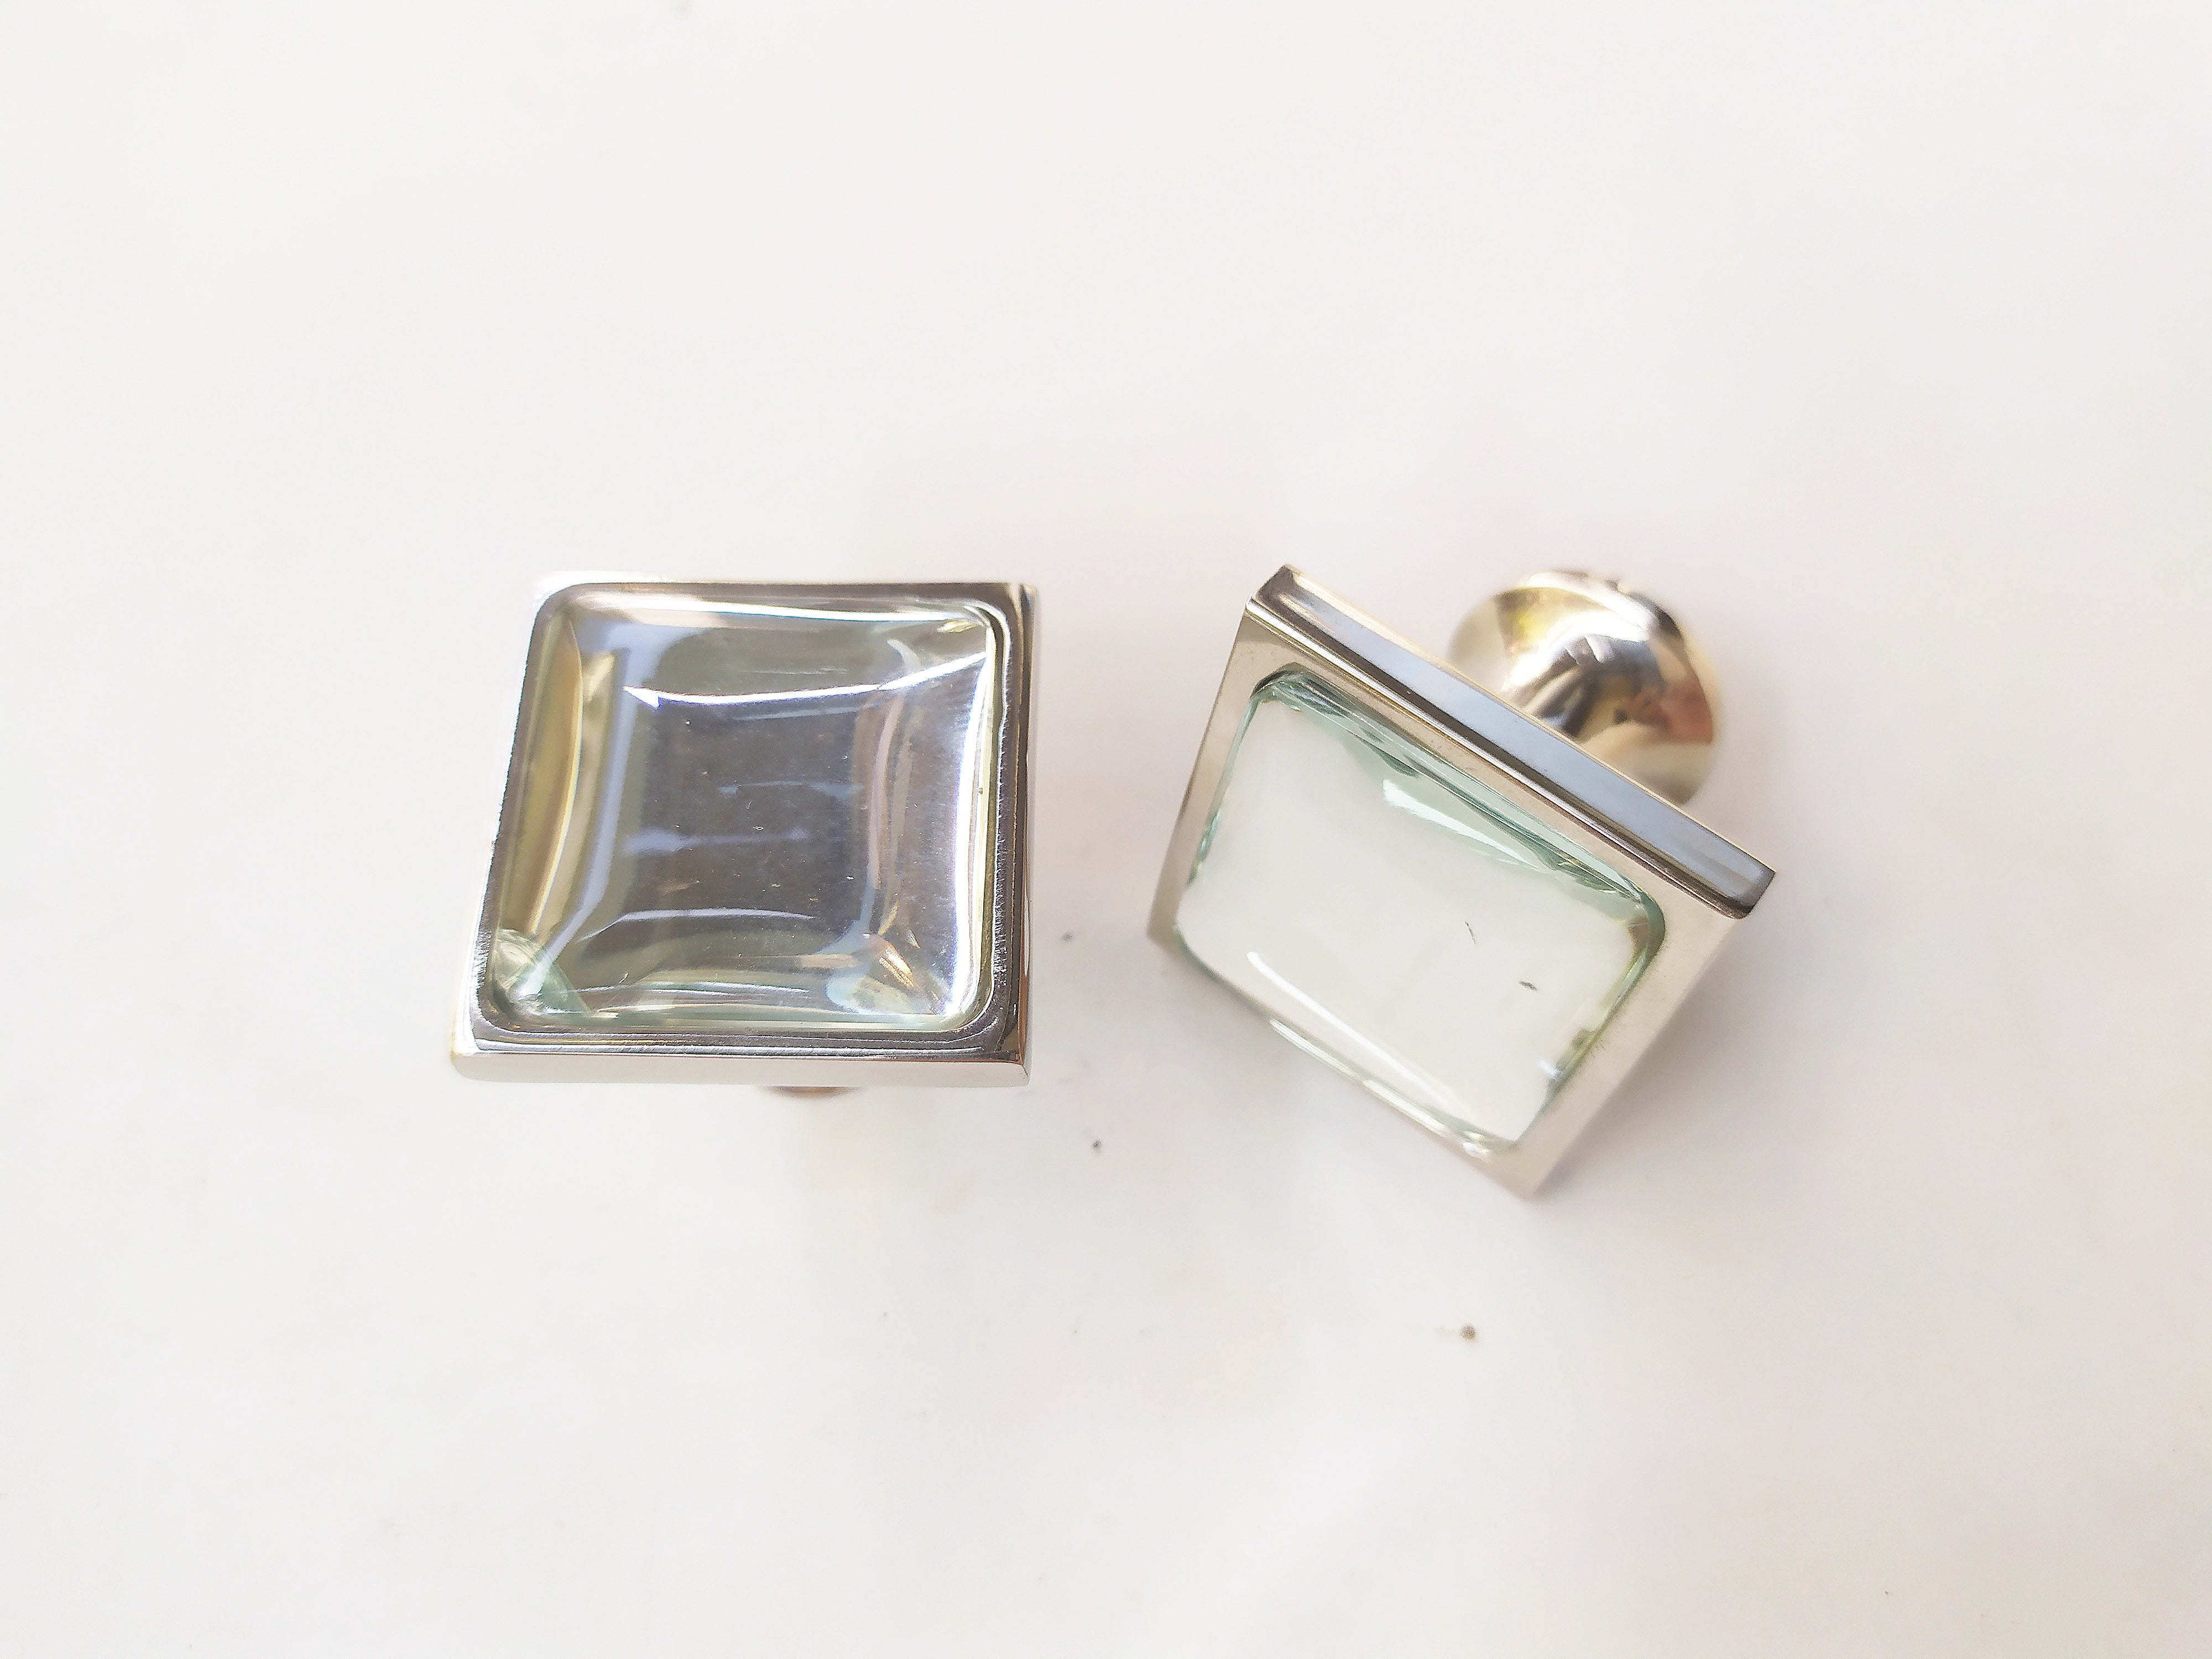 Inlaid square mirror knob in brass plated with nickel